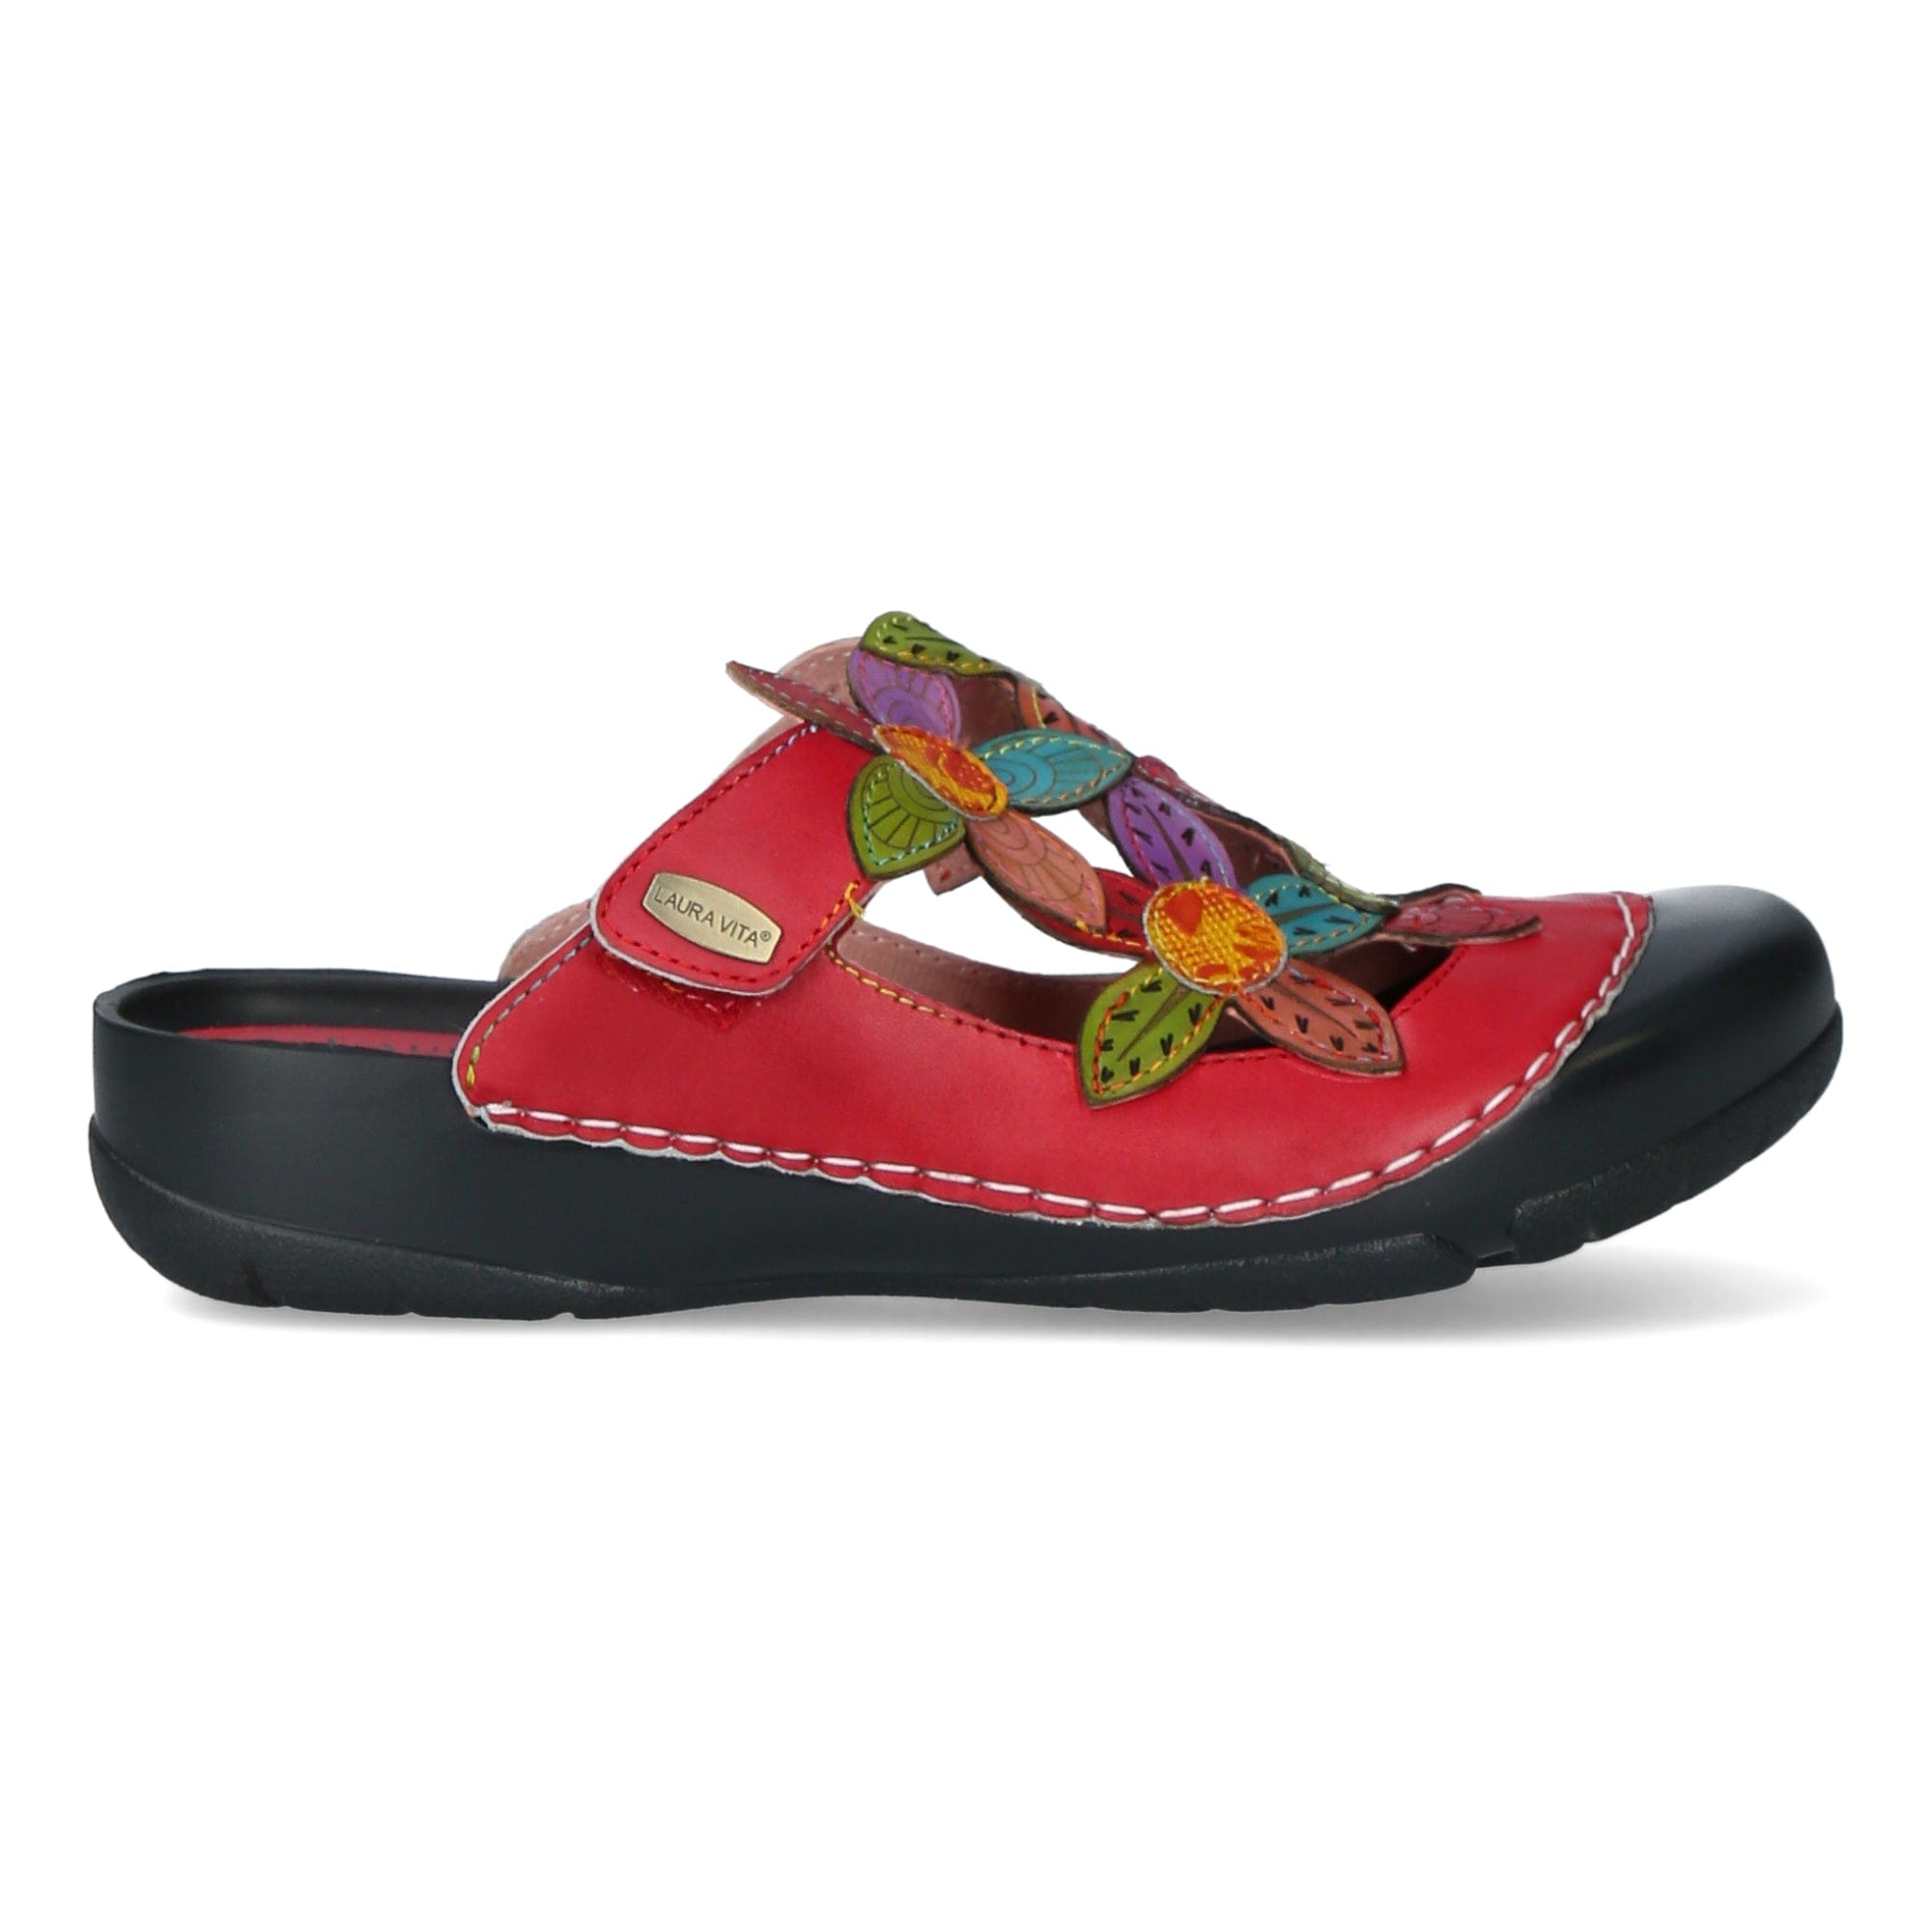 BECZIERSO 031 - 35 / RED - Mule